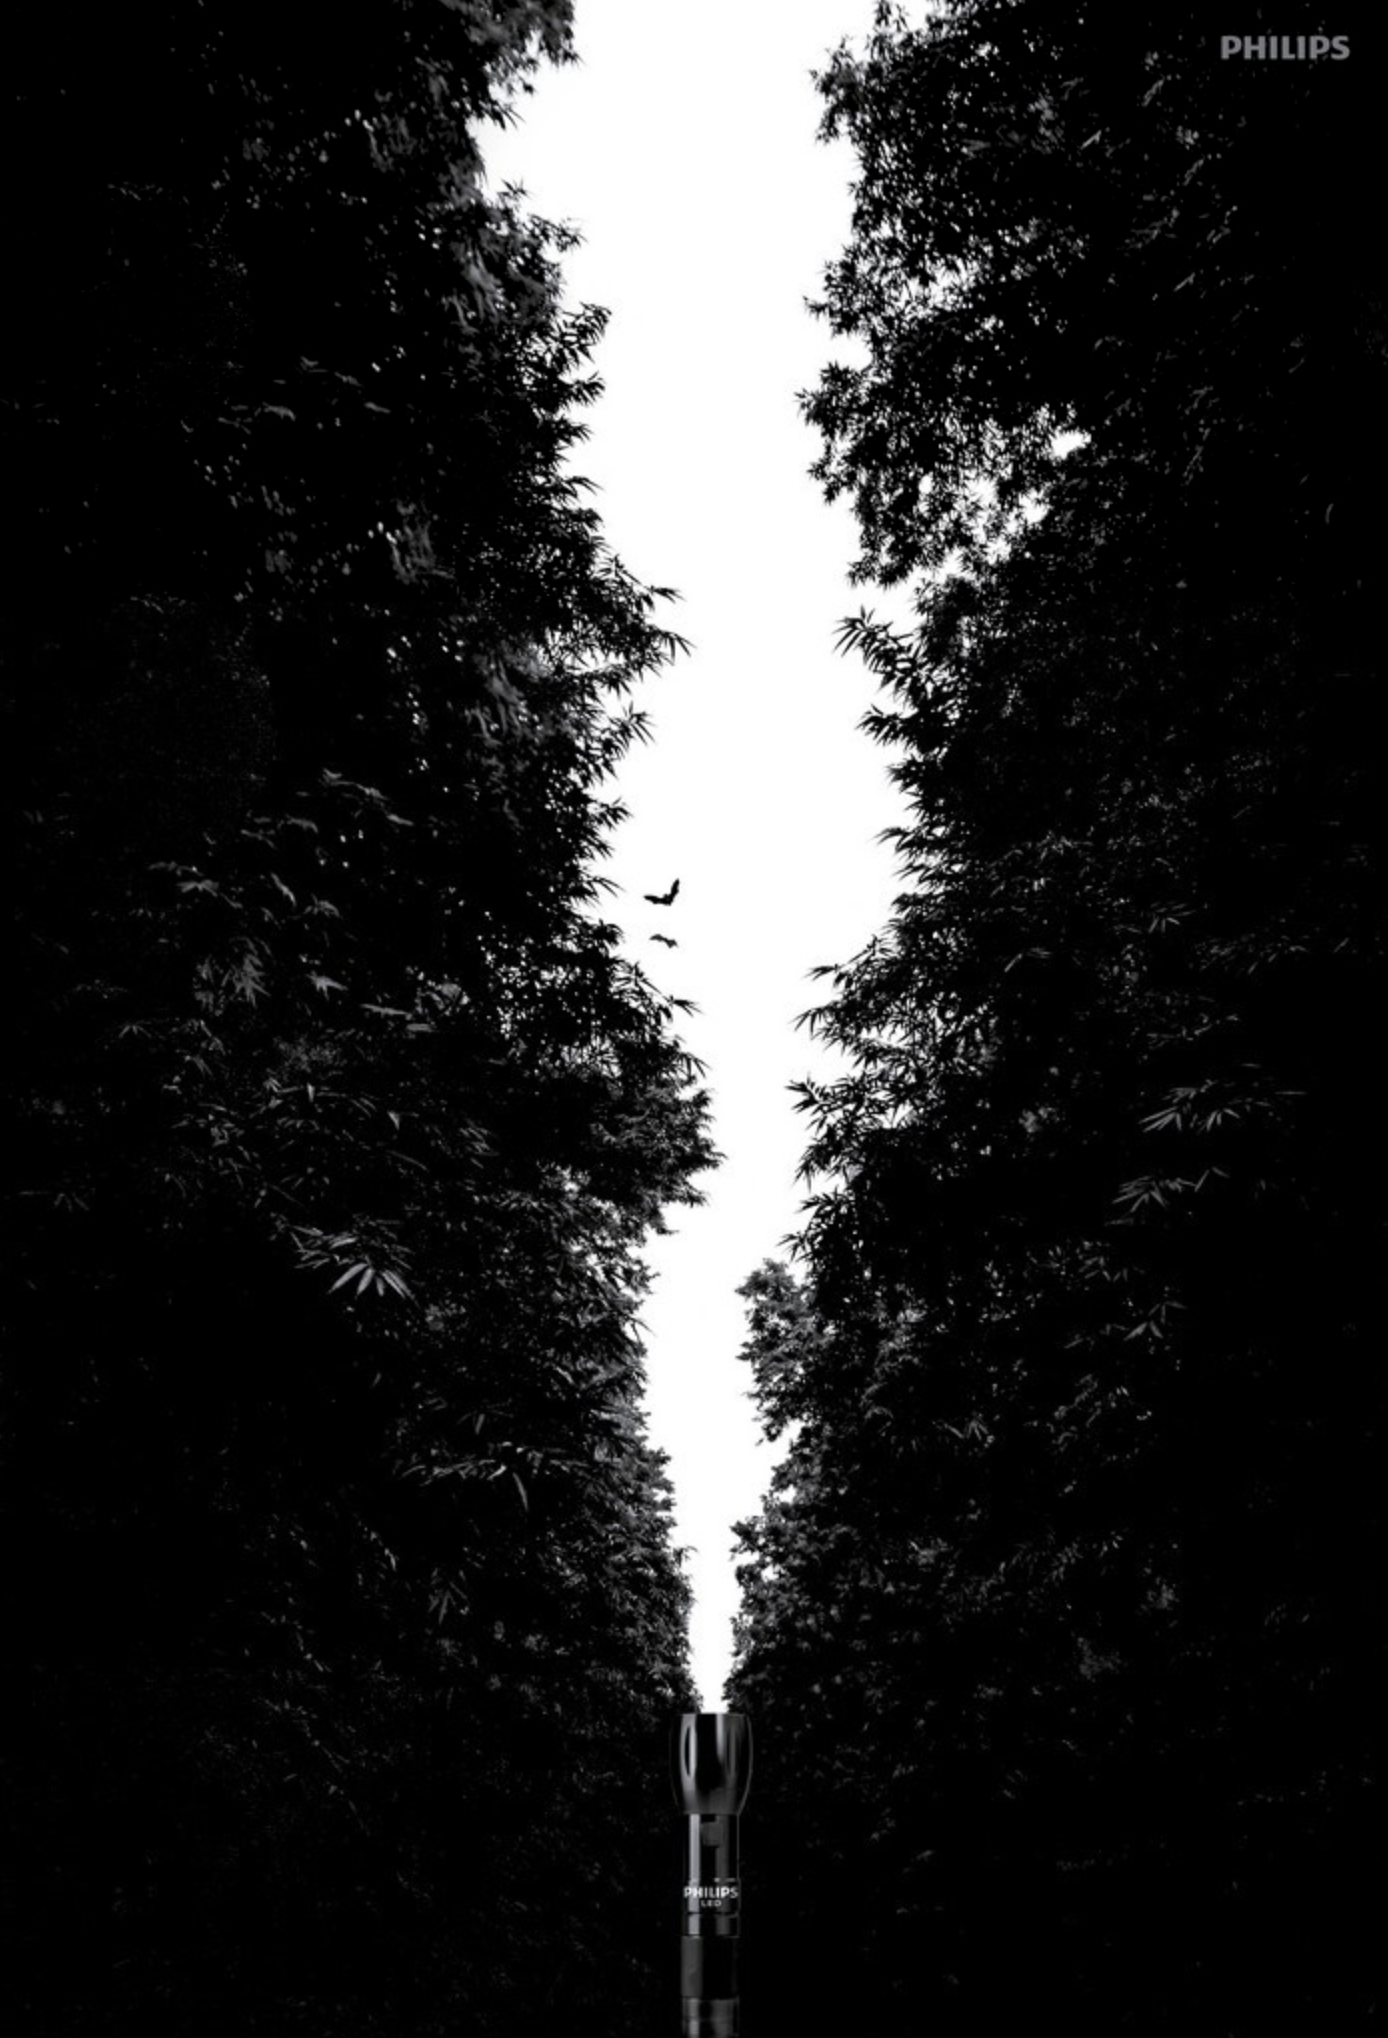 black-and-white image of a forest with a narrow strip of sky, with a torch at the bottom making it appear as if the sky is also the beam of the torch